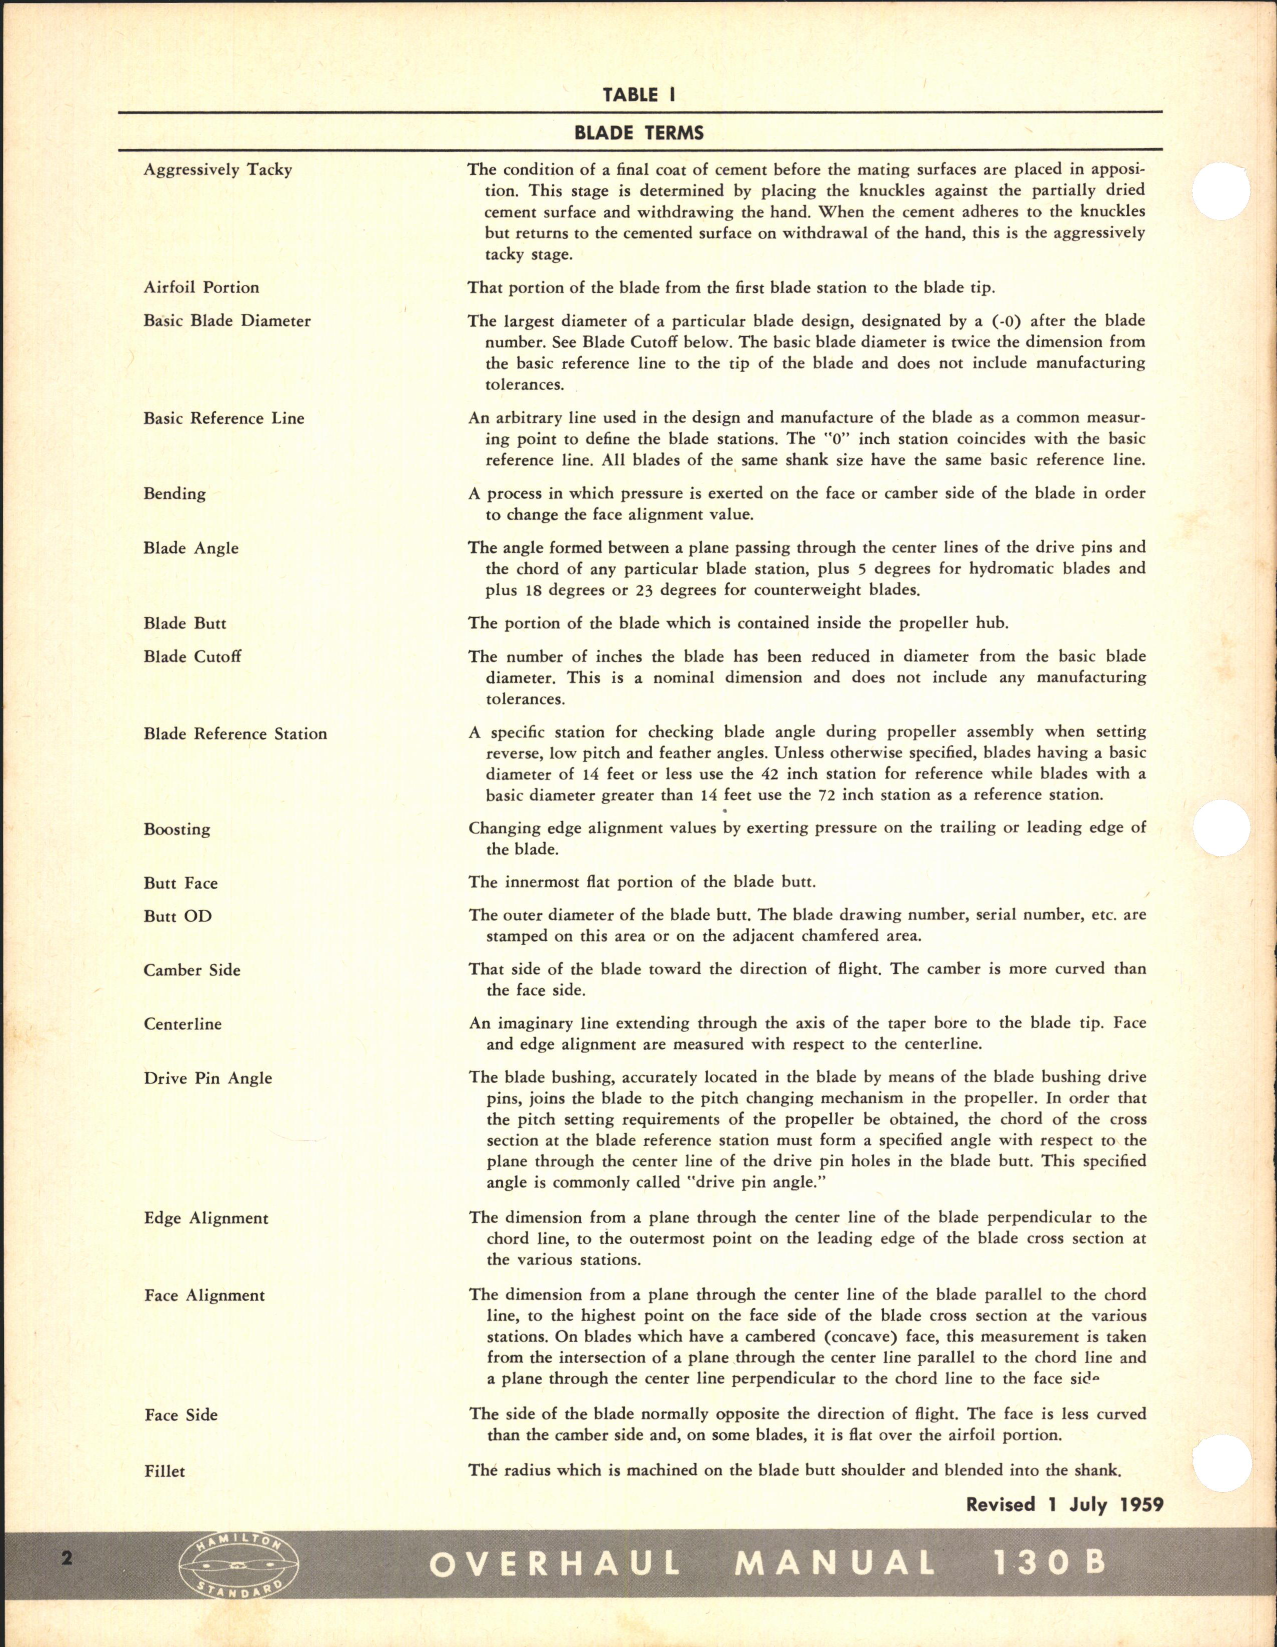 Sample page 22 from AirCorps Library document: Aluminum Blade Overhaul Manual for Hamilton Standard Propellers